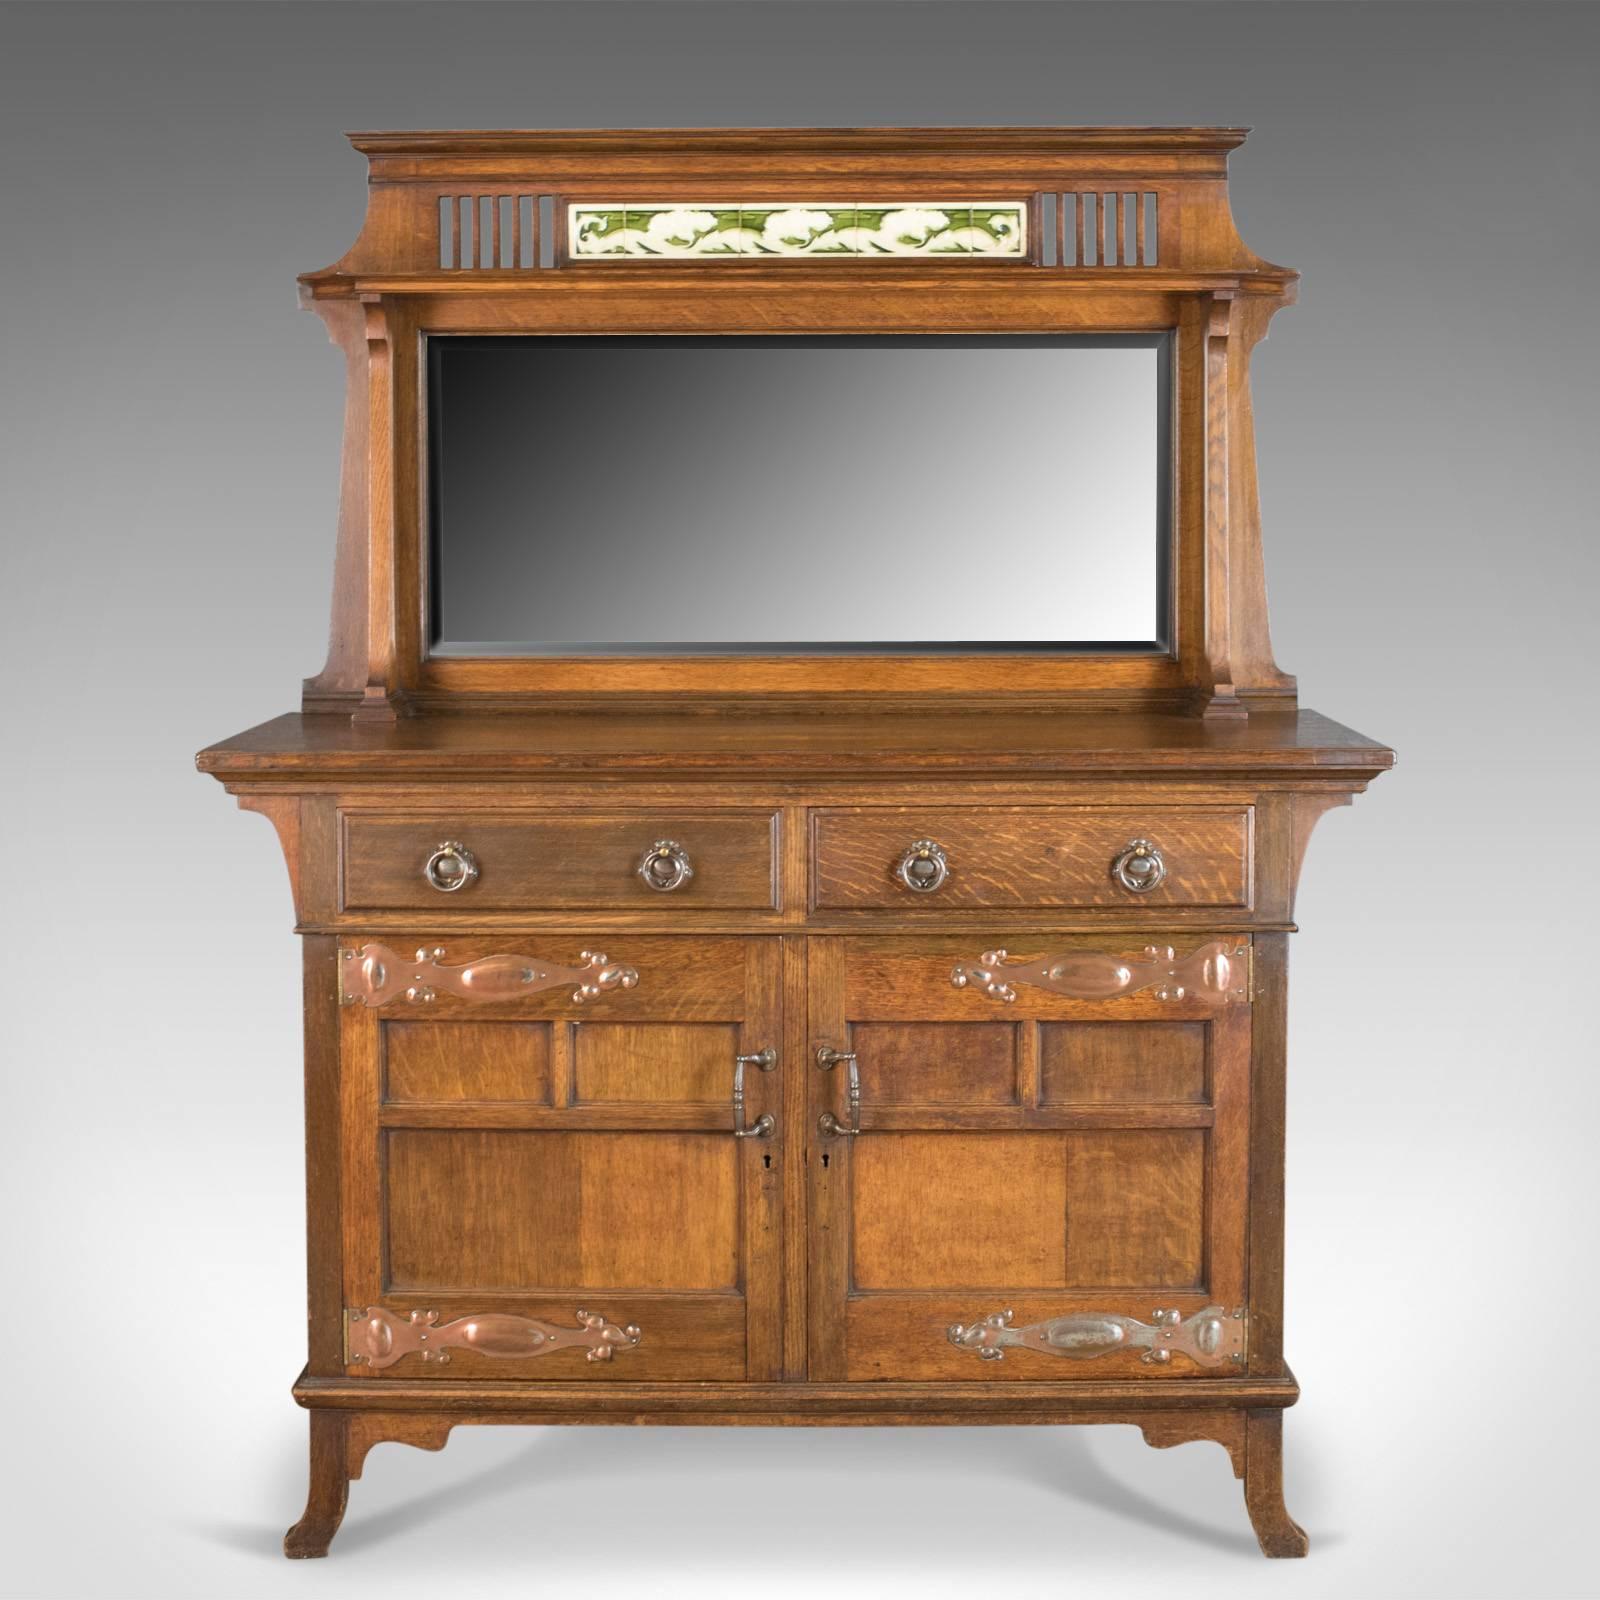 This is an antique sideboard, English, oak, Arts & Crafts cabinet in the liberty taste dating to circa 1900.

Of quality craftsmanship in well figured English oak
Displaying wisps of medullary rays in the wax polished finish
In the taste of